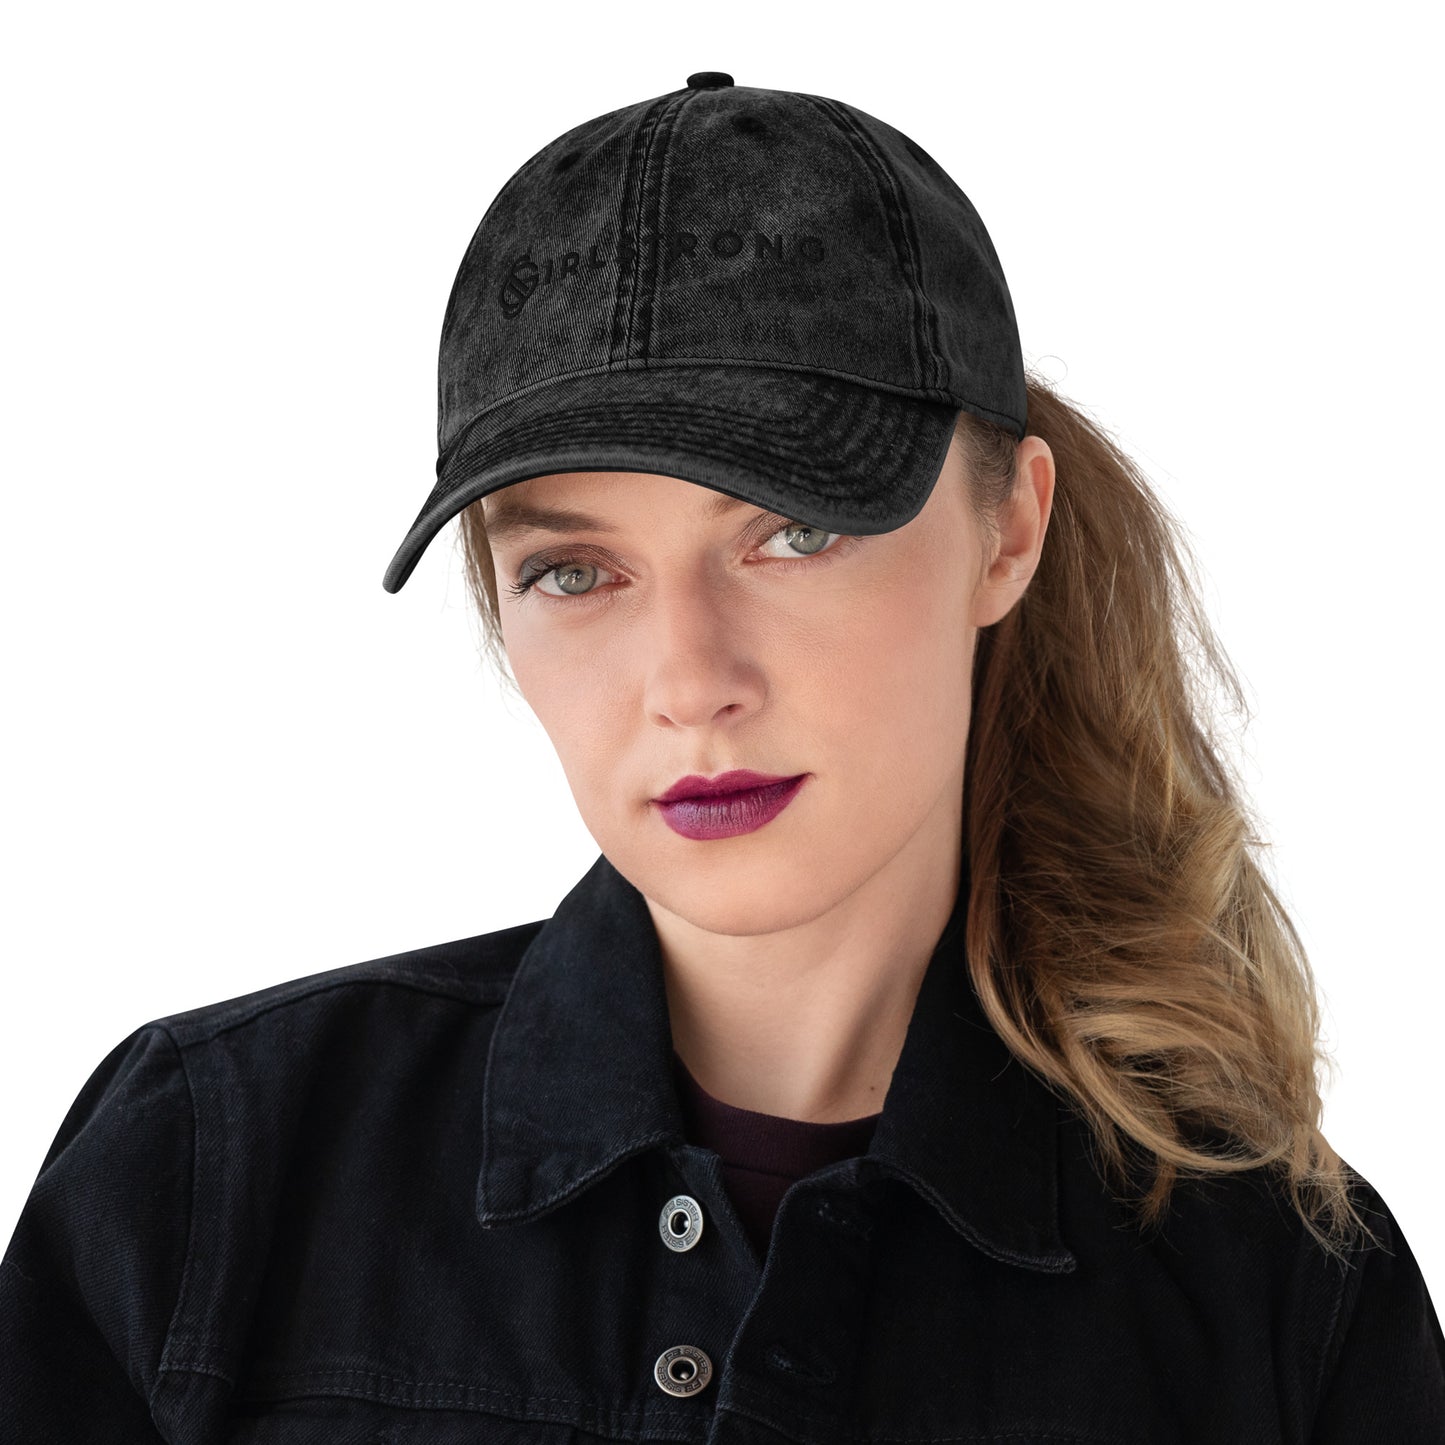 Vintage Cotton Twill Embroidery Black Cap Girlstrong